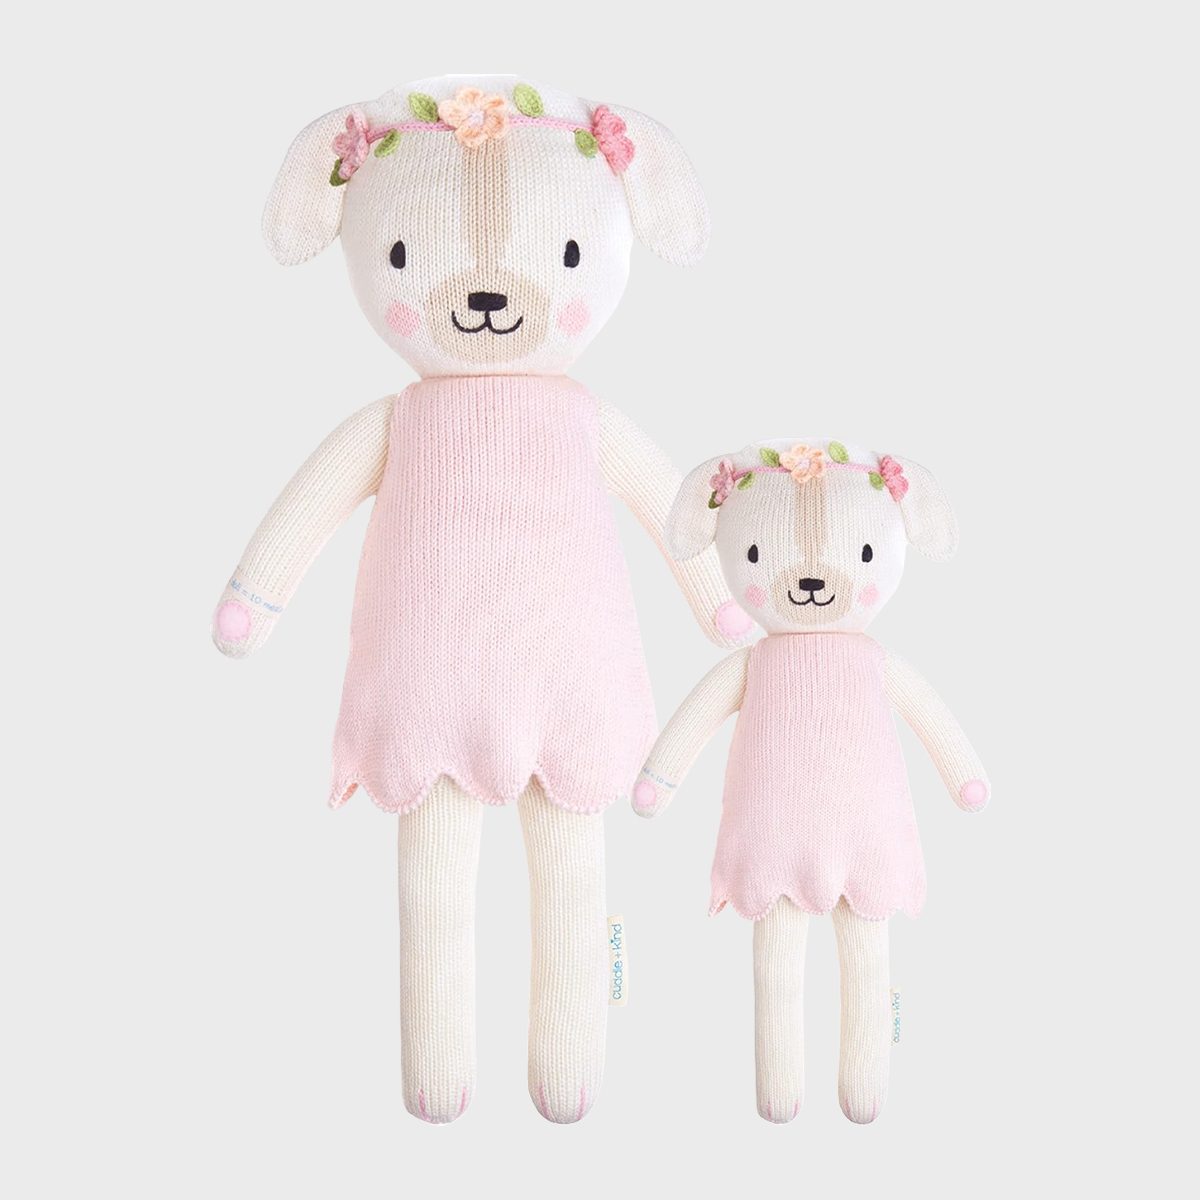 <p>Whether you're attending their baby shower or first birthday party, give baby heirloom-quality gifts for girls that they can cherish forever. Cuddle + Kind's <a href="https://www.amazon.com/CUDDLE-KIND-Charlotte-Dog-Little/dp/B07ML6H4TD" rel="noopener noreferrer">award-winning dolls</a> are hand-knit with love down to the tiniest detail. They come in two different sizes and there are dozens of friends to choose from, each more adorable than the last.</p> <p>And to make these dolls even sweeter, for each one purchased, the company will donate 10 meals to children in need around the world and right here in the U.S. Now that's a <a href="https://www.rd.com/list/best-baby-gifts/" rel="noopener noreferrer">thoughtful gift for a new parent</a>!</p> <p class="listicle-page__cta-button-shop"><a class="shop-btn" href="https://www.amazon.com/CUDDLE-KIND-Charlotte-Dog-Little/dp/B07ML6H4TD/">Shop Now</a></p>